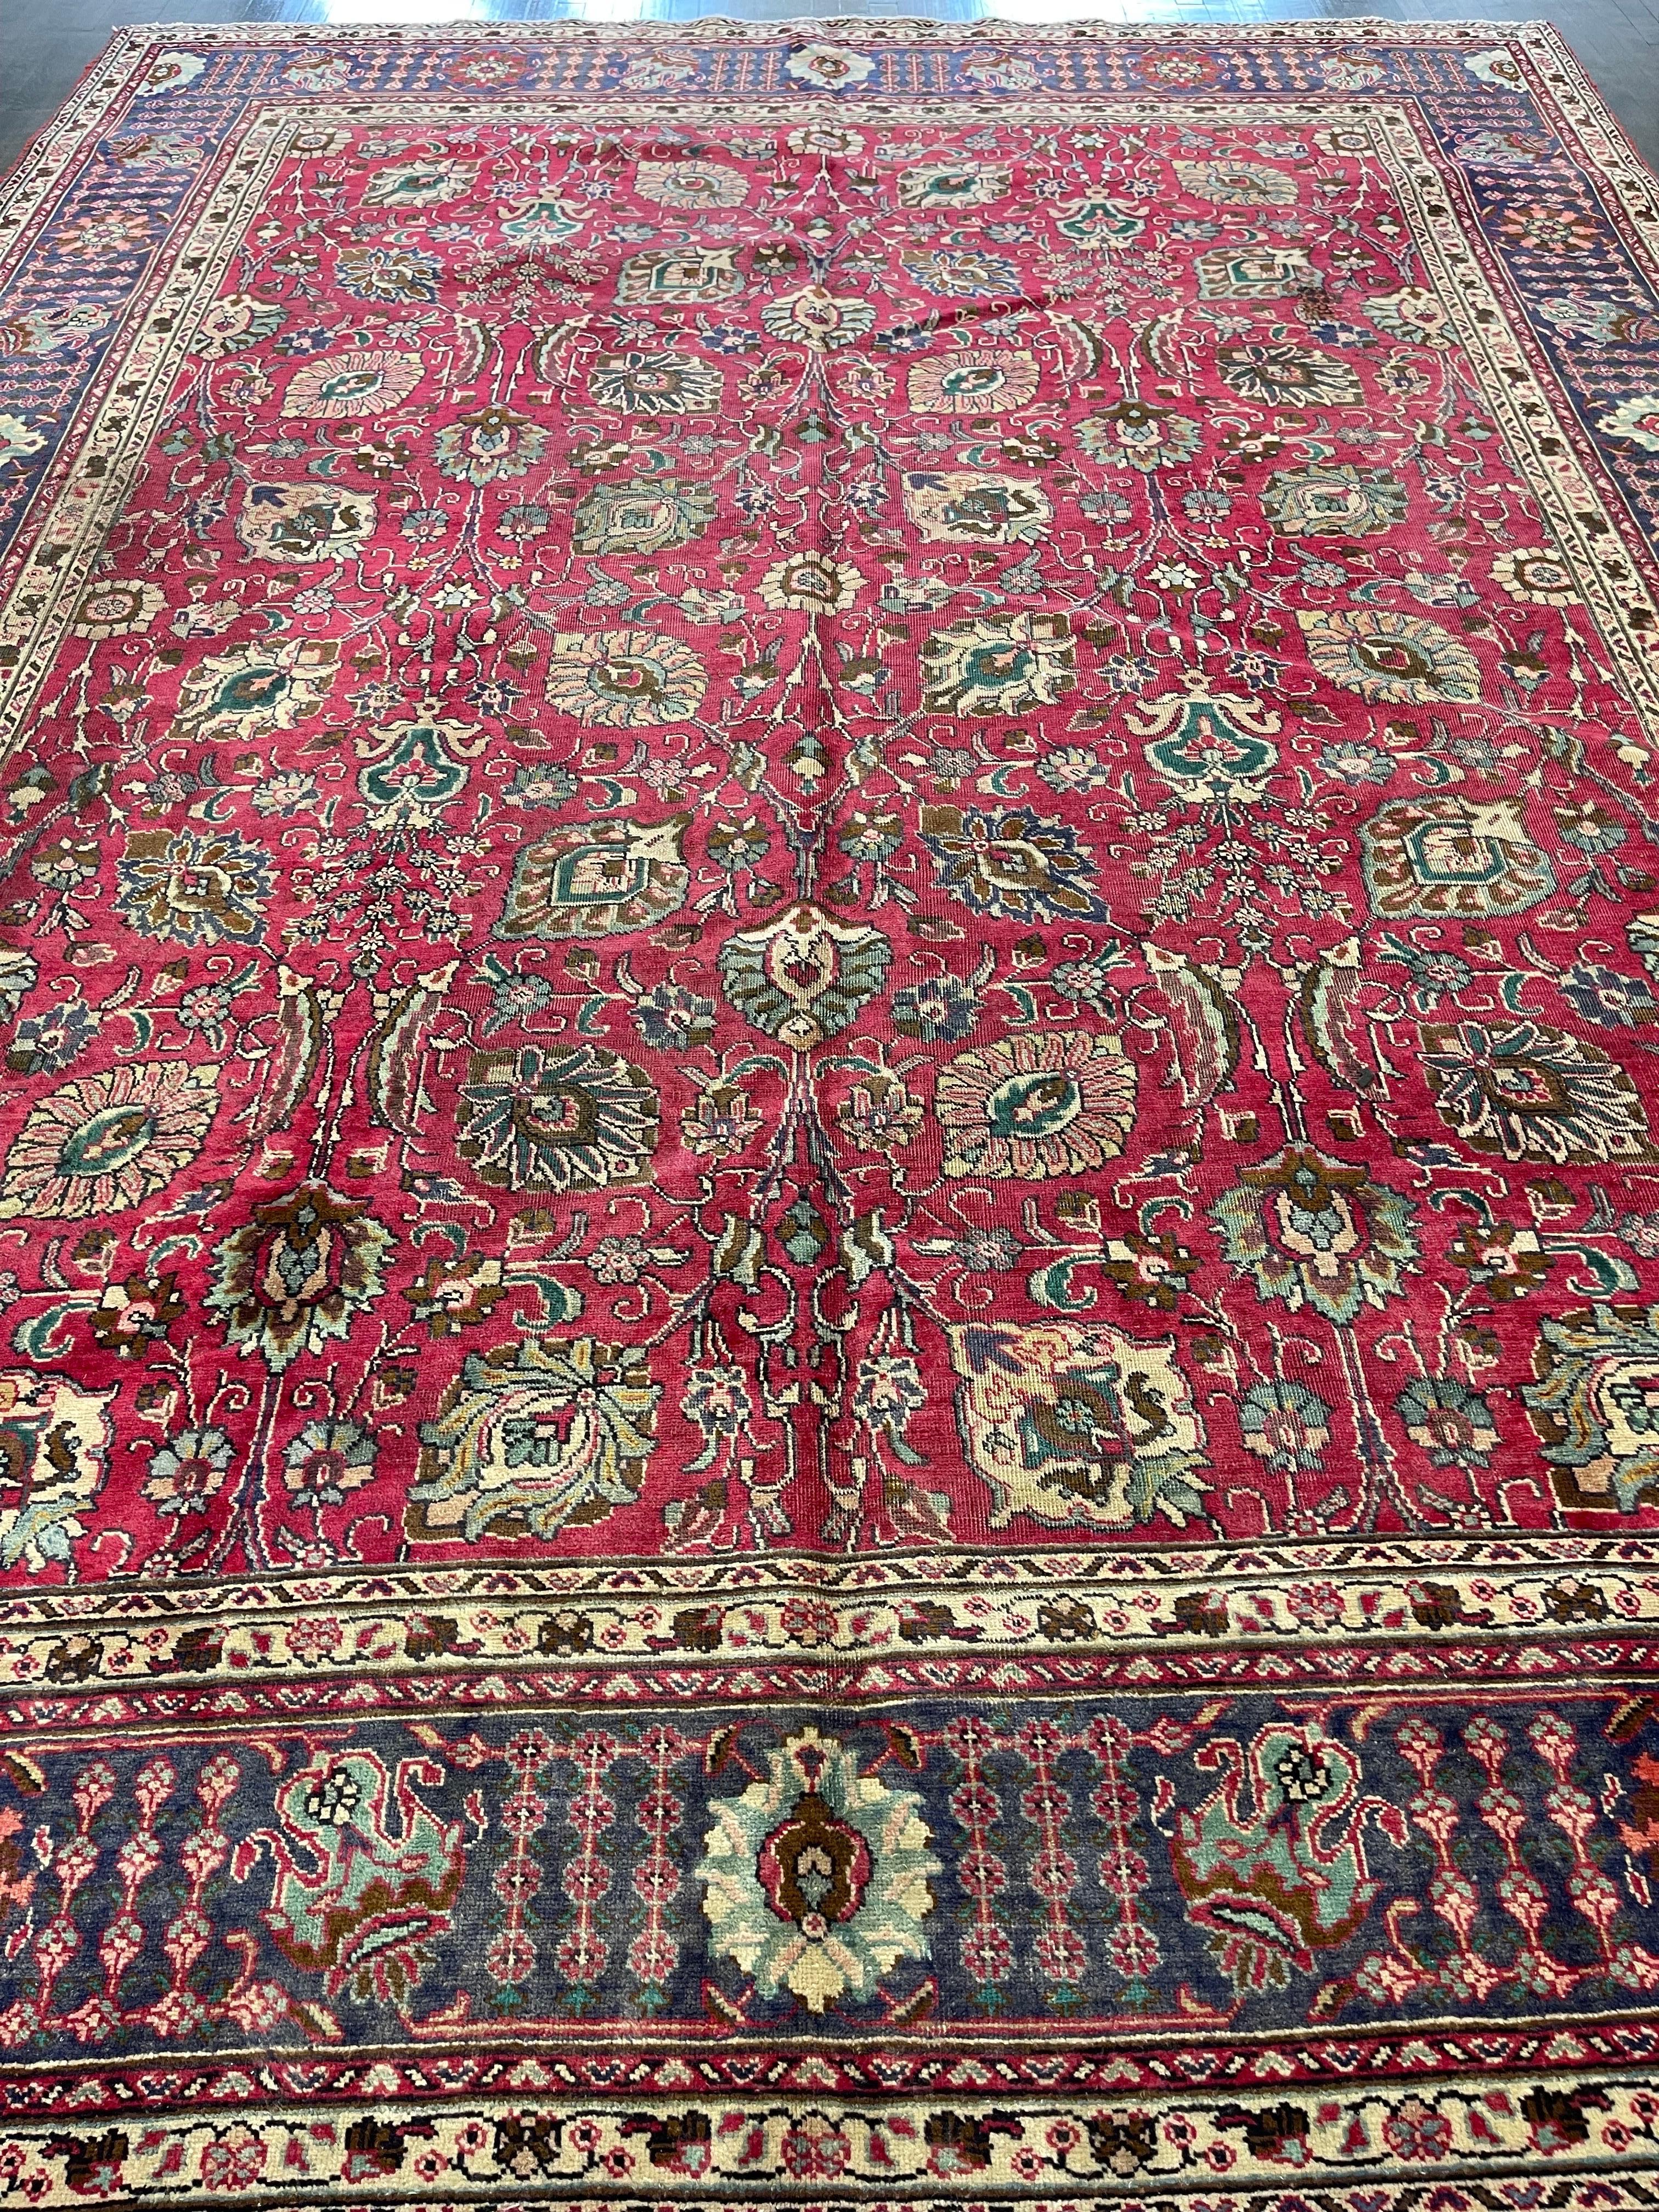 Authentic antique Persian Tabriz in a rare magenta (purplish-red) field with an angular all-over trellis of floral sprays framed on a navy blue border. This distressed rug would work with various interiors like rustic, tudor, arts and crafts or